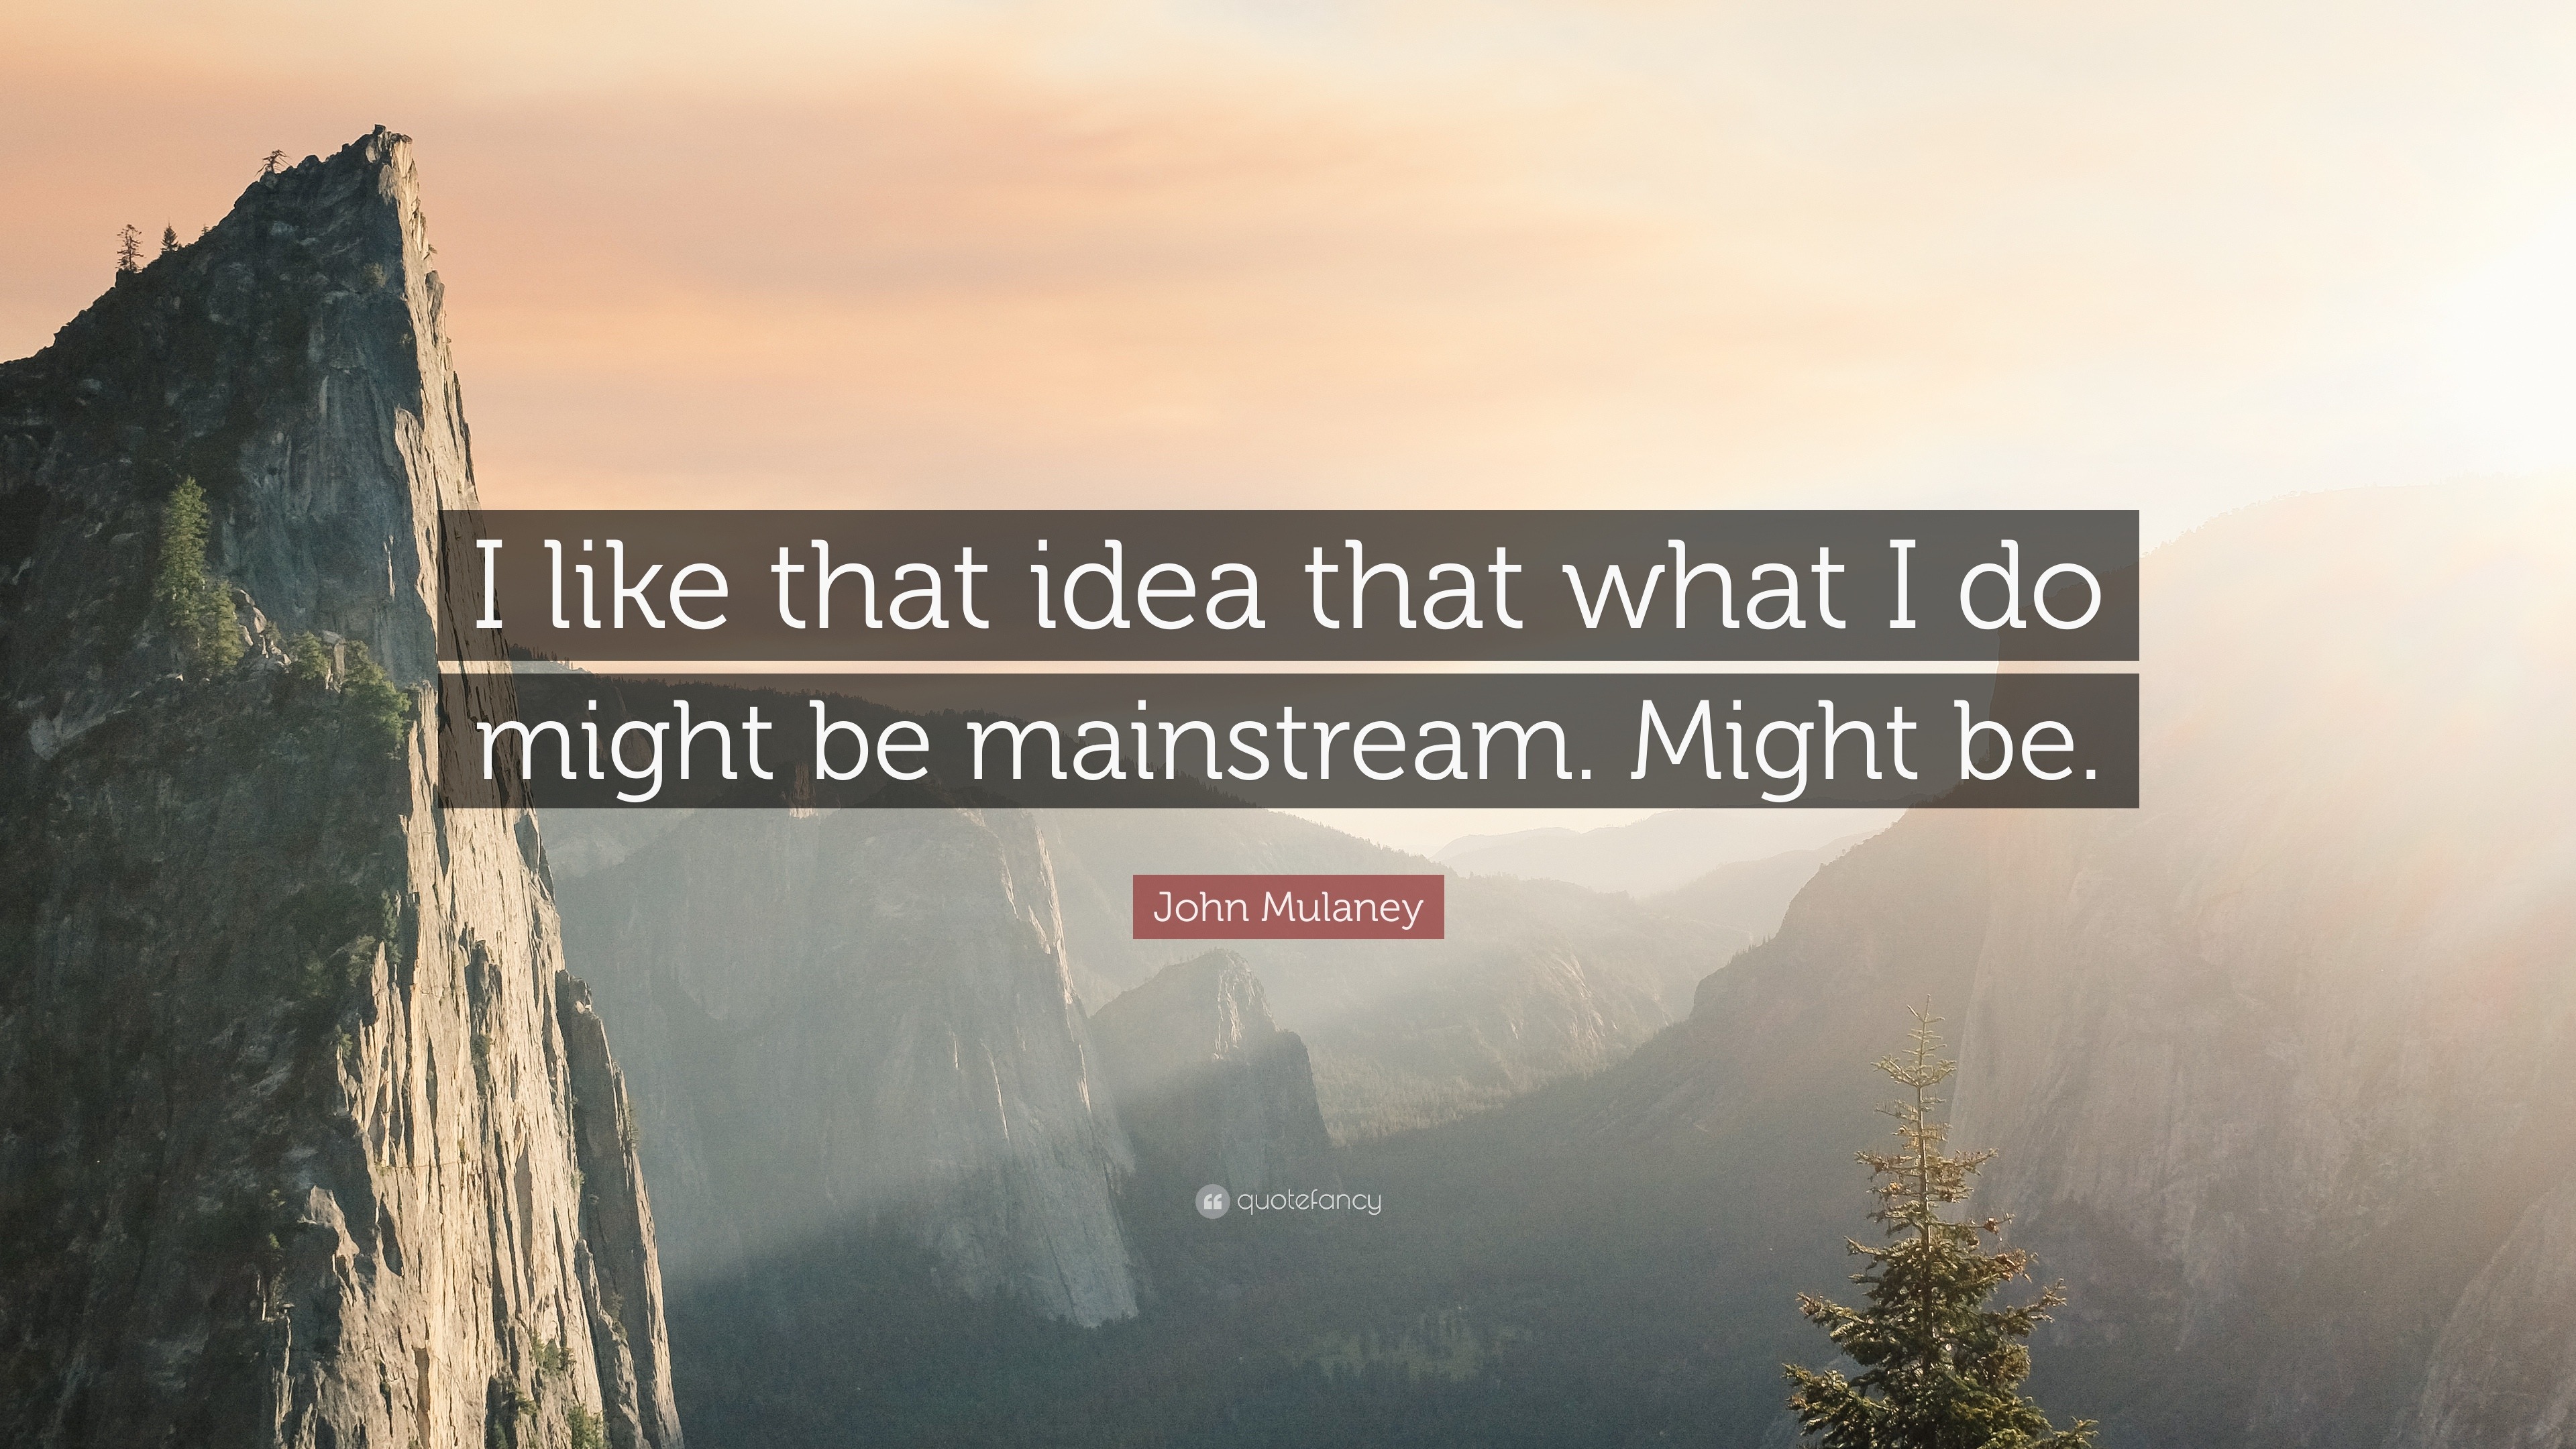 John Mulaney Quotes (33 wallpapers) - Quotefancy